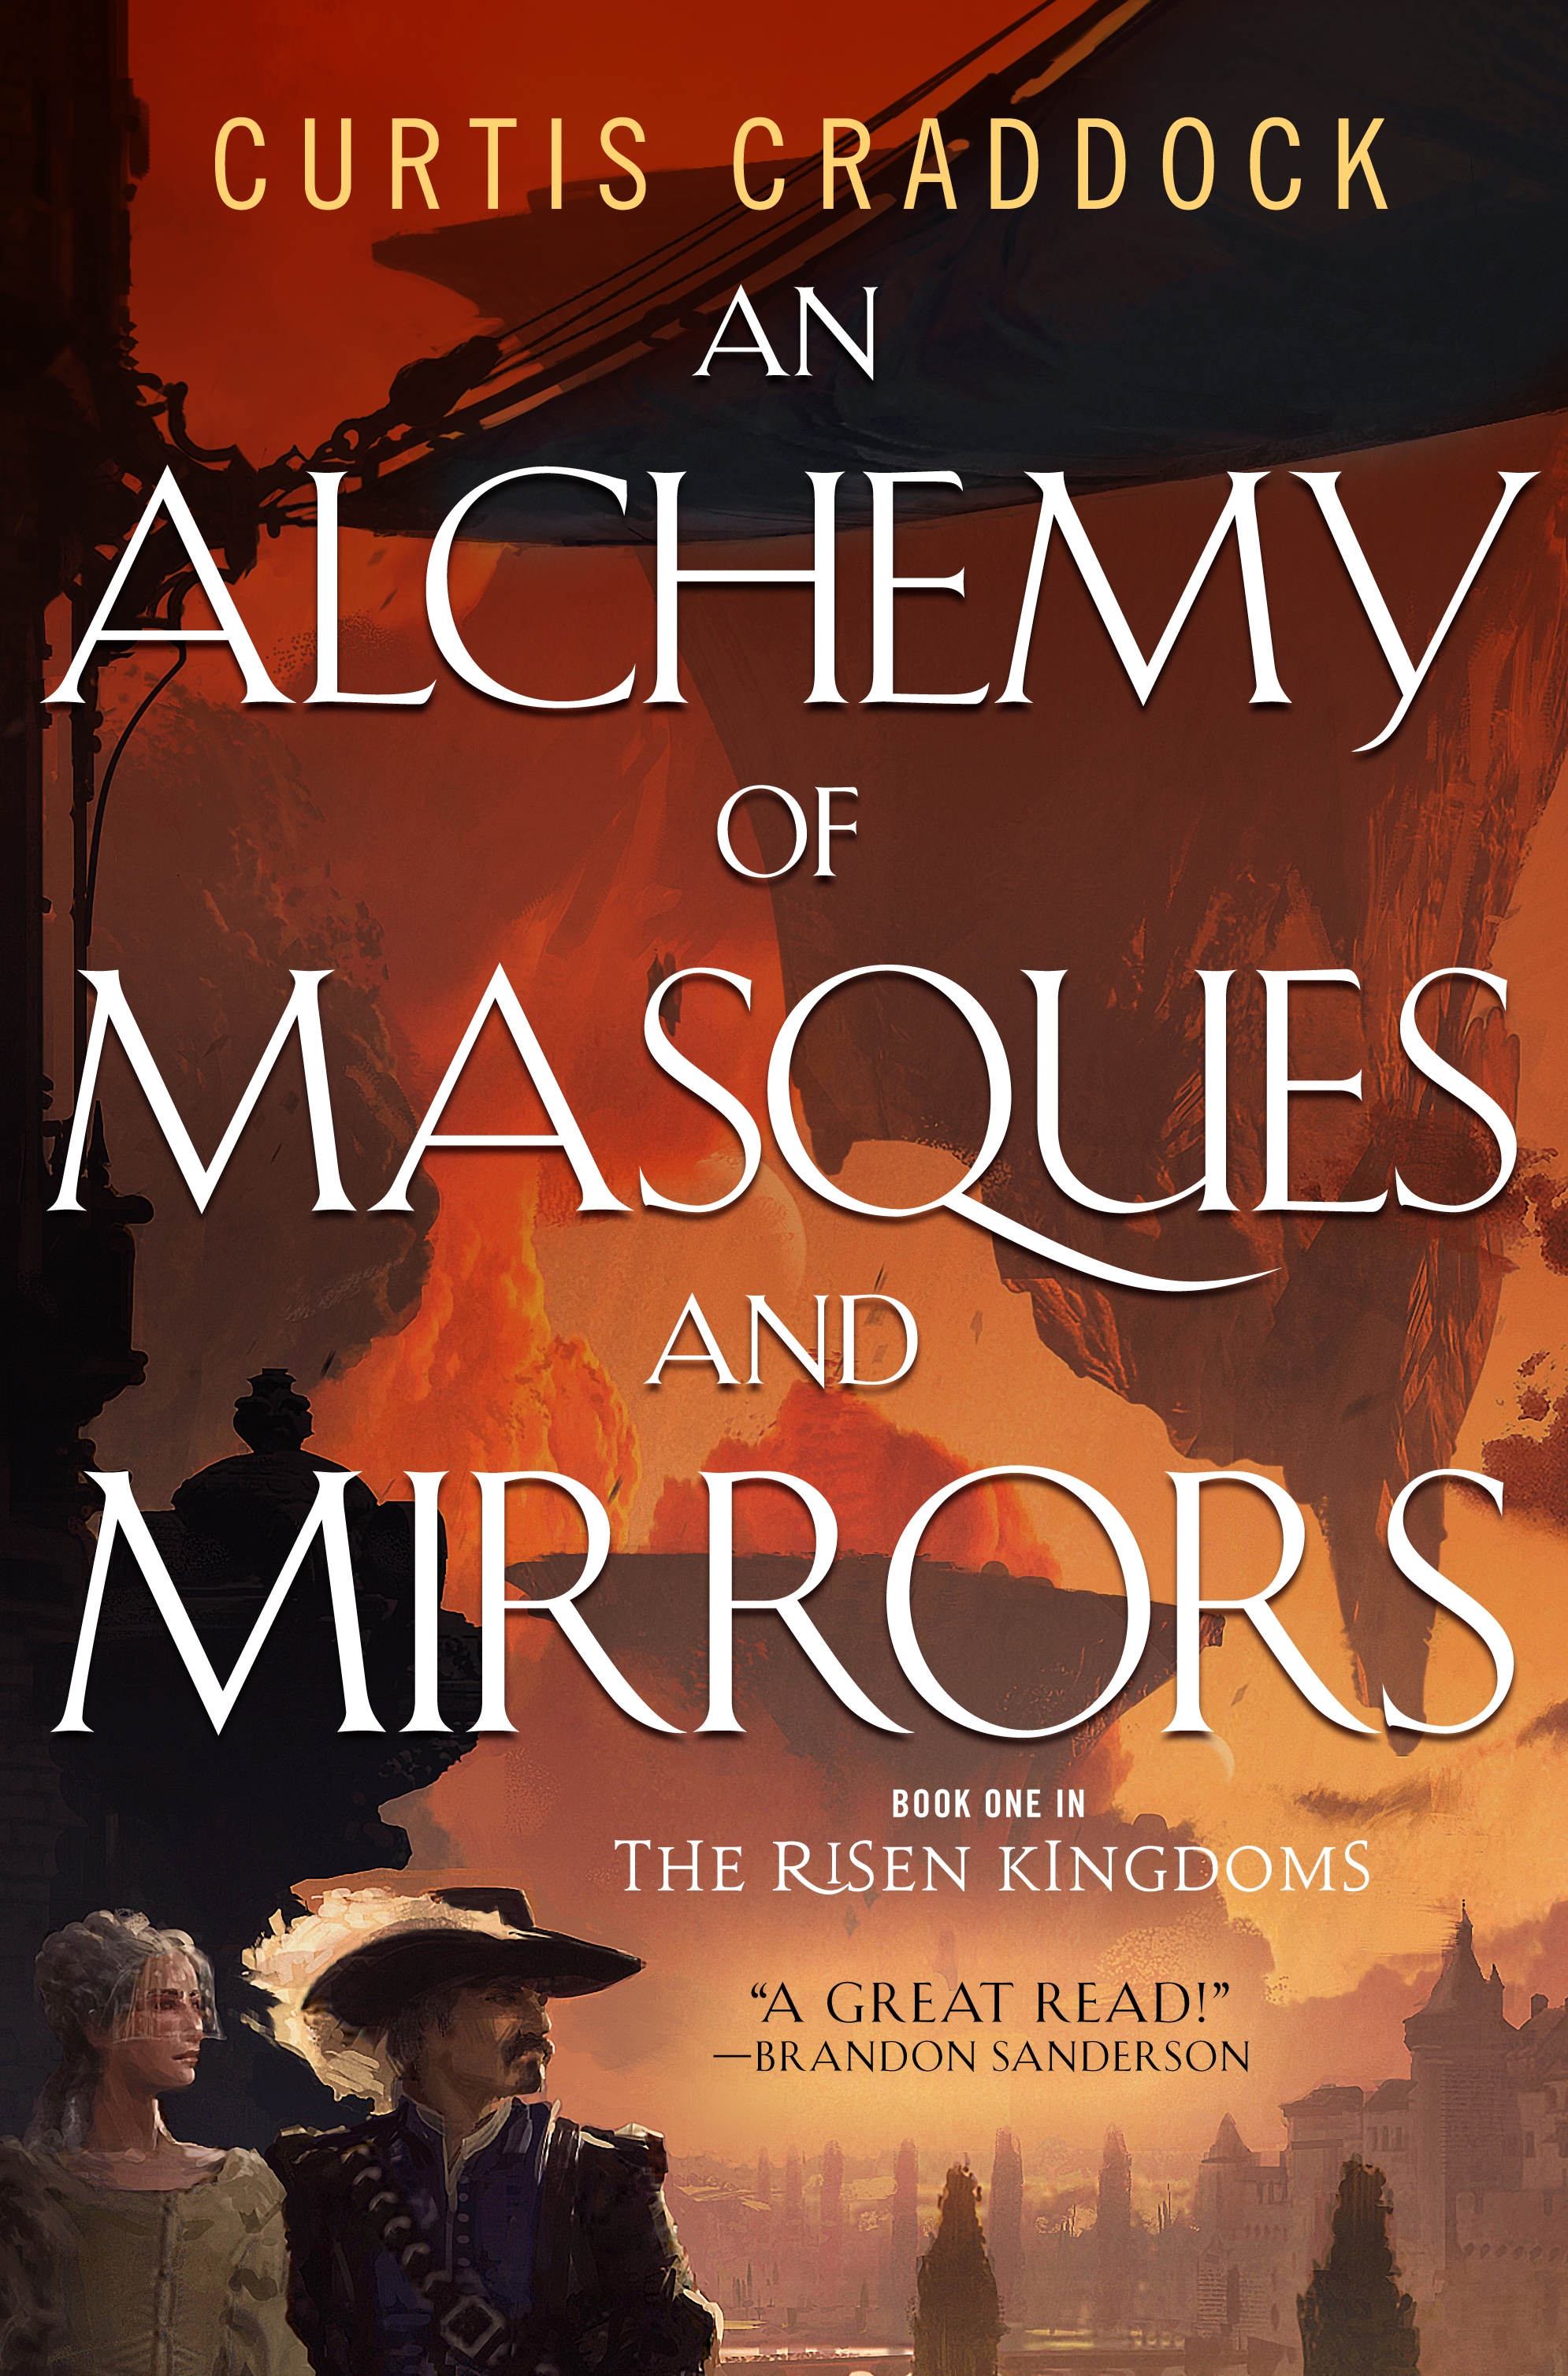 An Alchemy of Masques and Mirrors : Book One in the Risen Kingdoms by Curtis Craddock